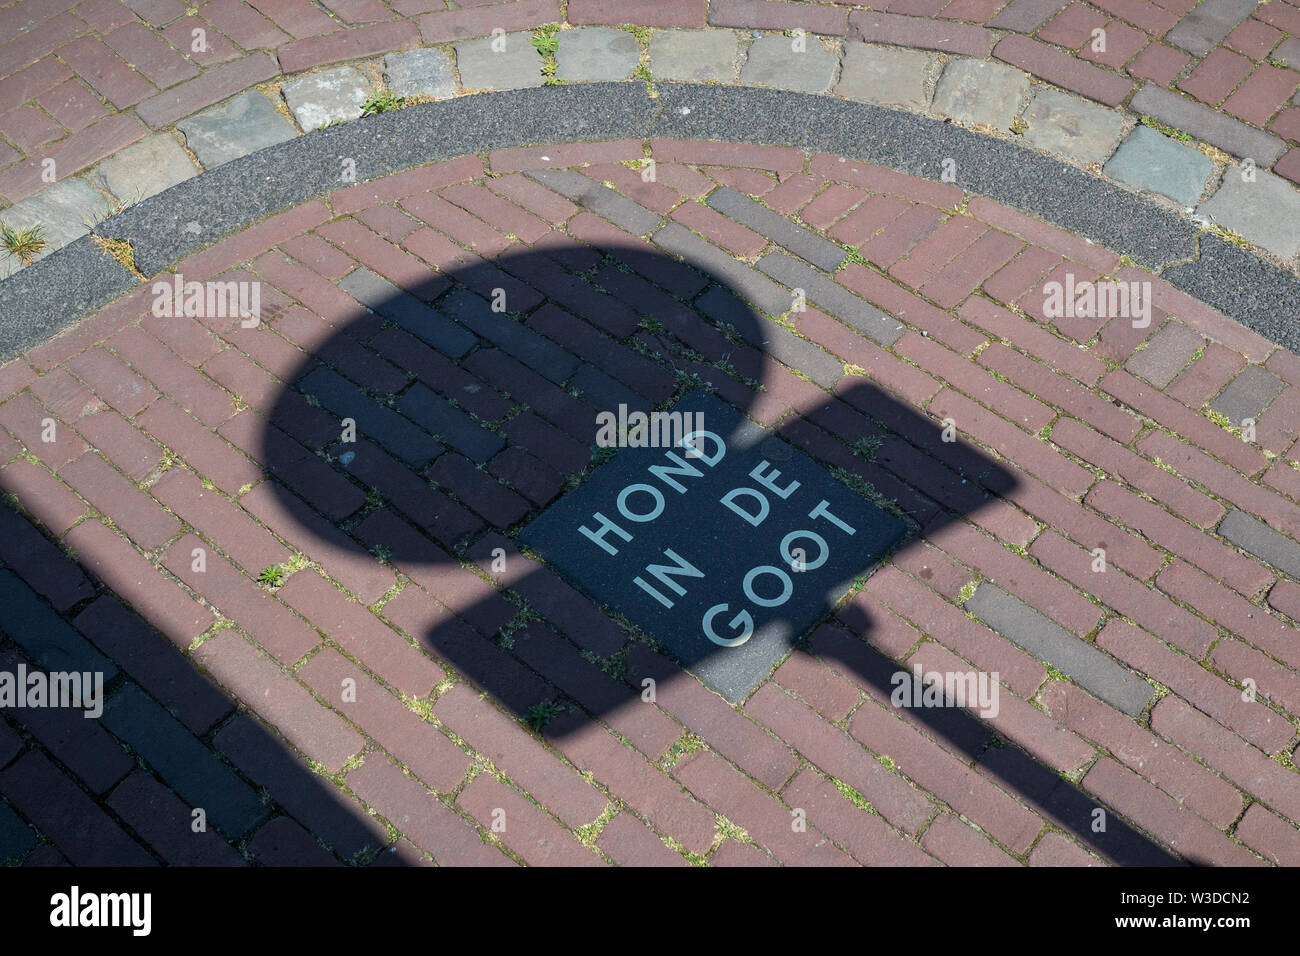 Leiden, Holland - July 05, 2019: Paving stone with dutch text which means Dog in the gutter, warning owners of dogs to let them defecate in the street Stock Photo